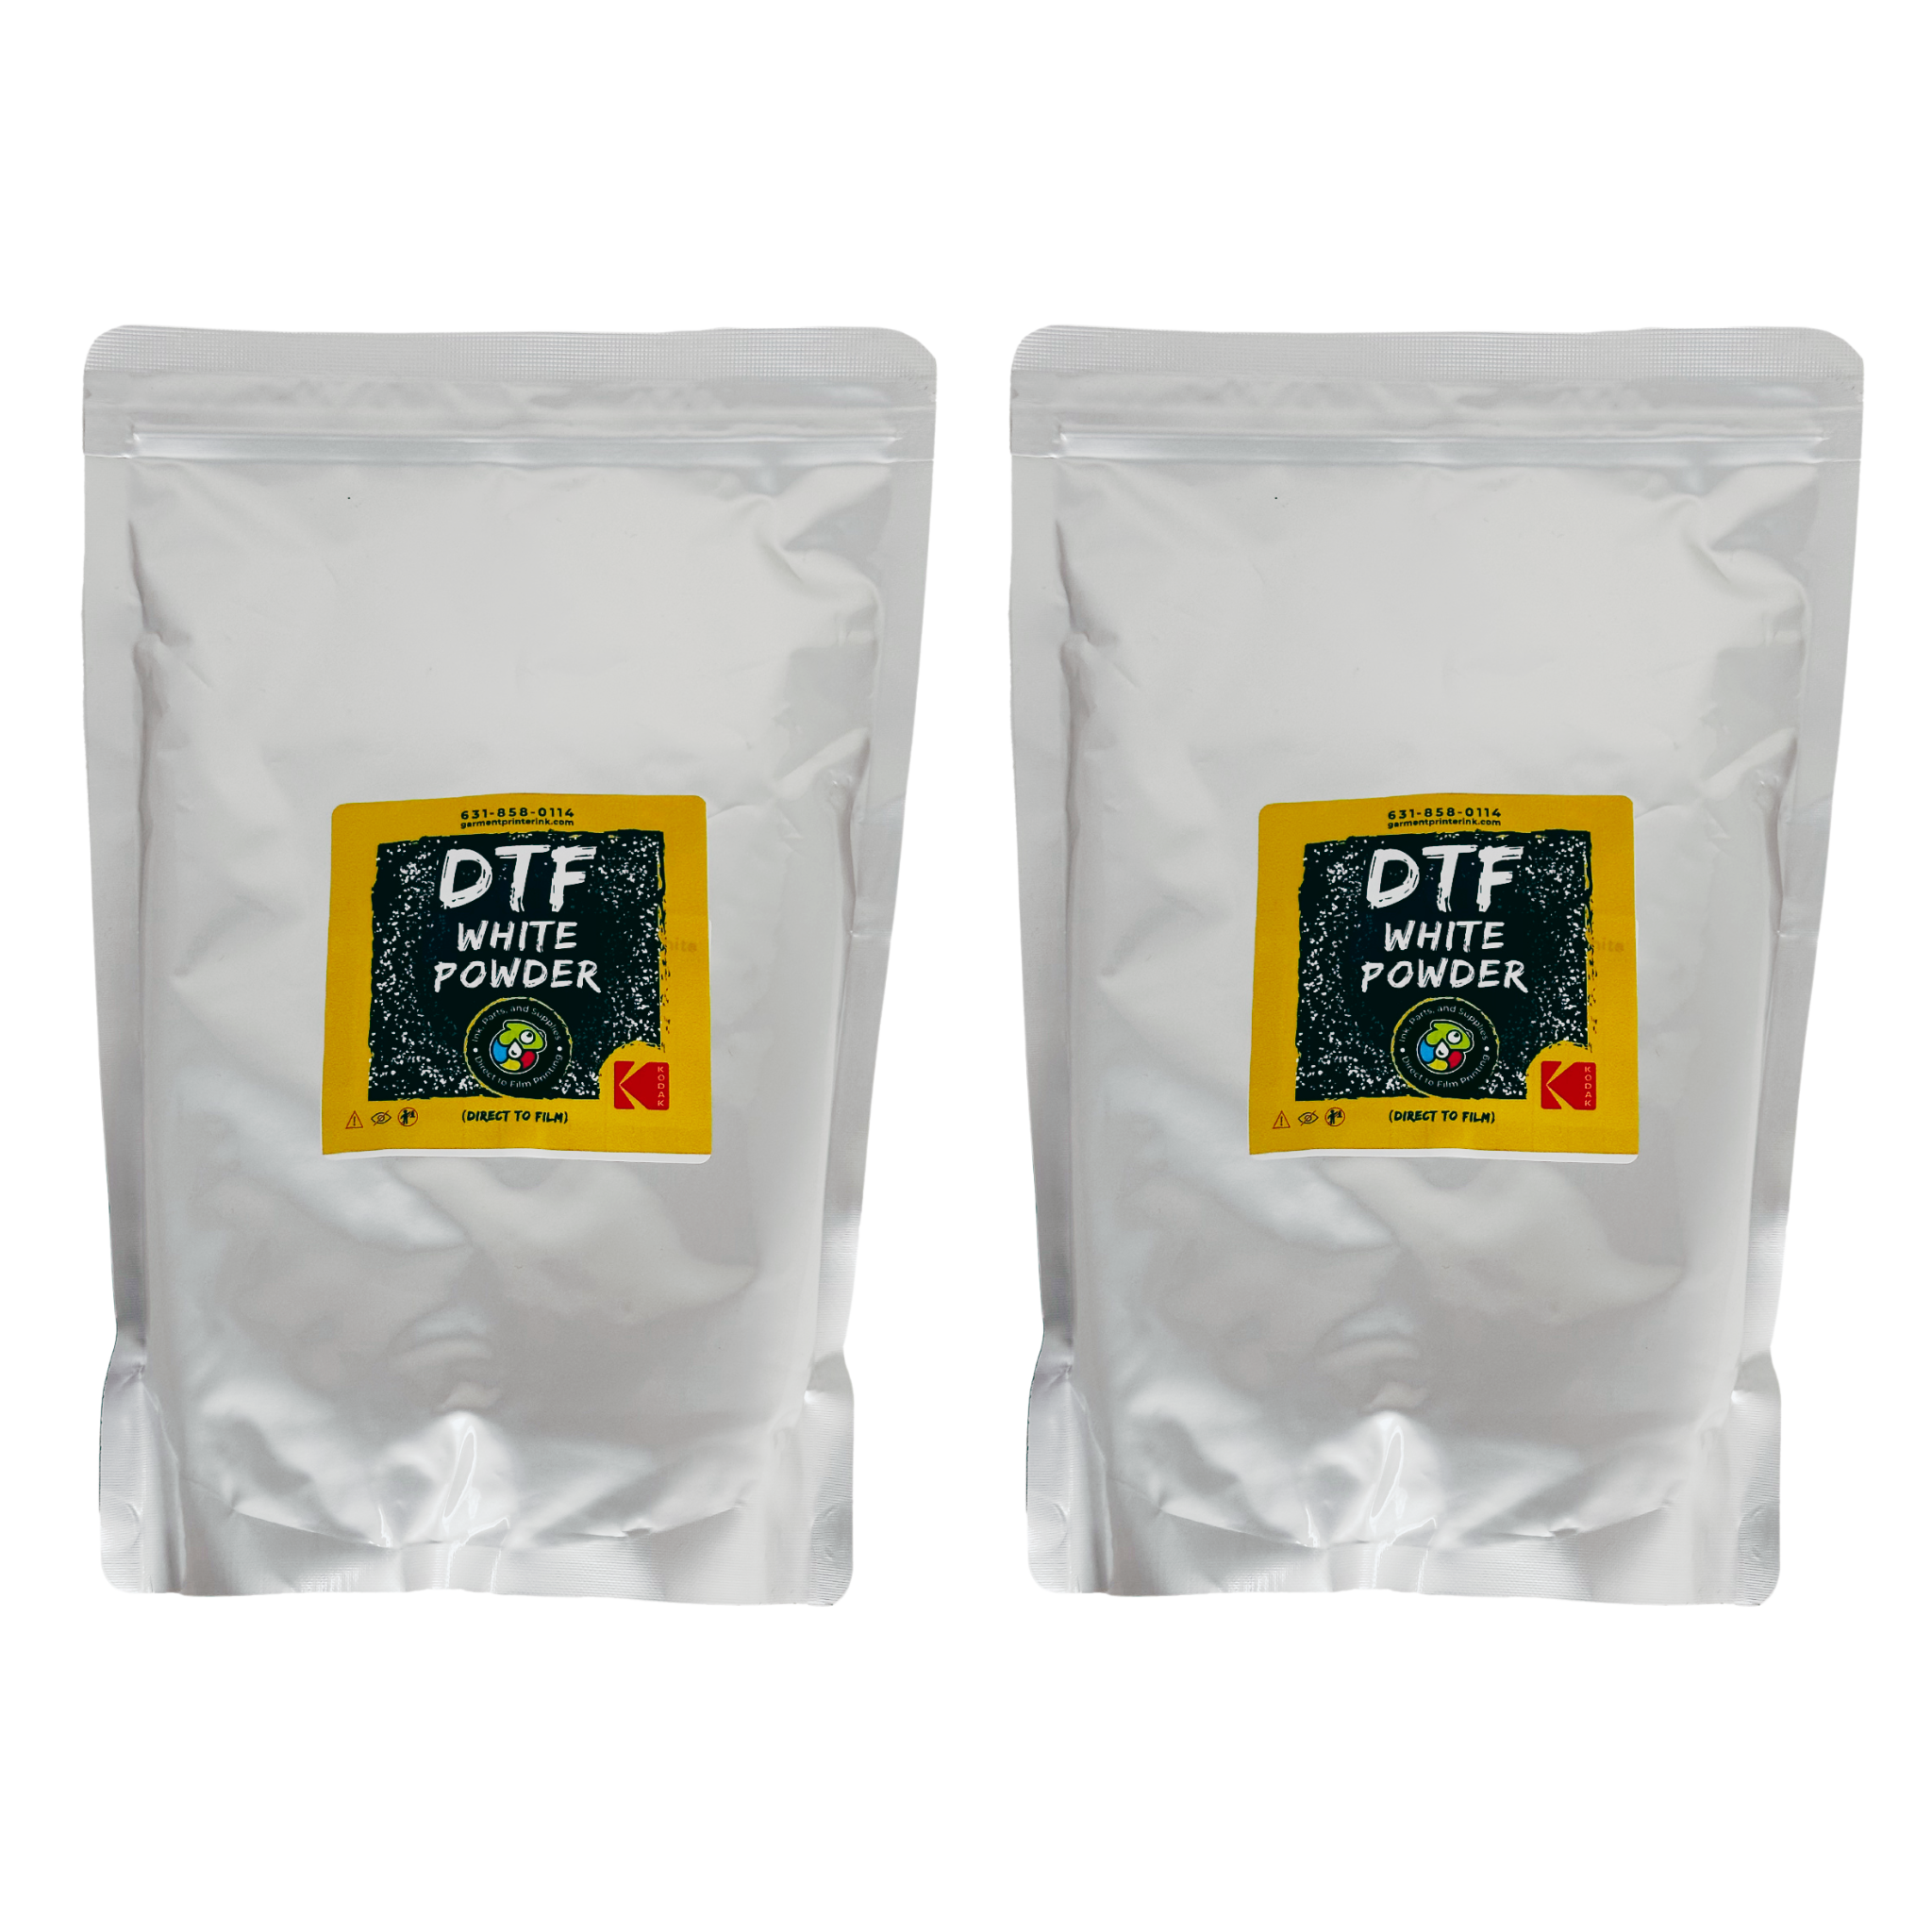 DTF Kodak White Powder 2Kg bags for direct to film curing